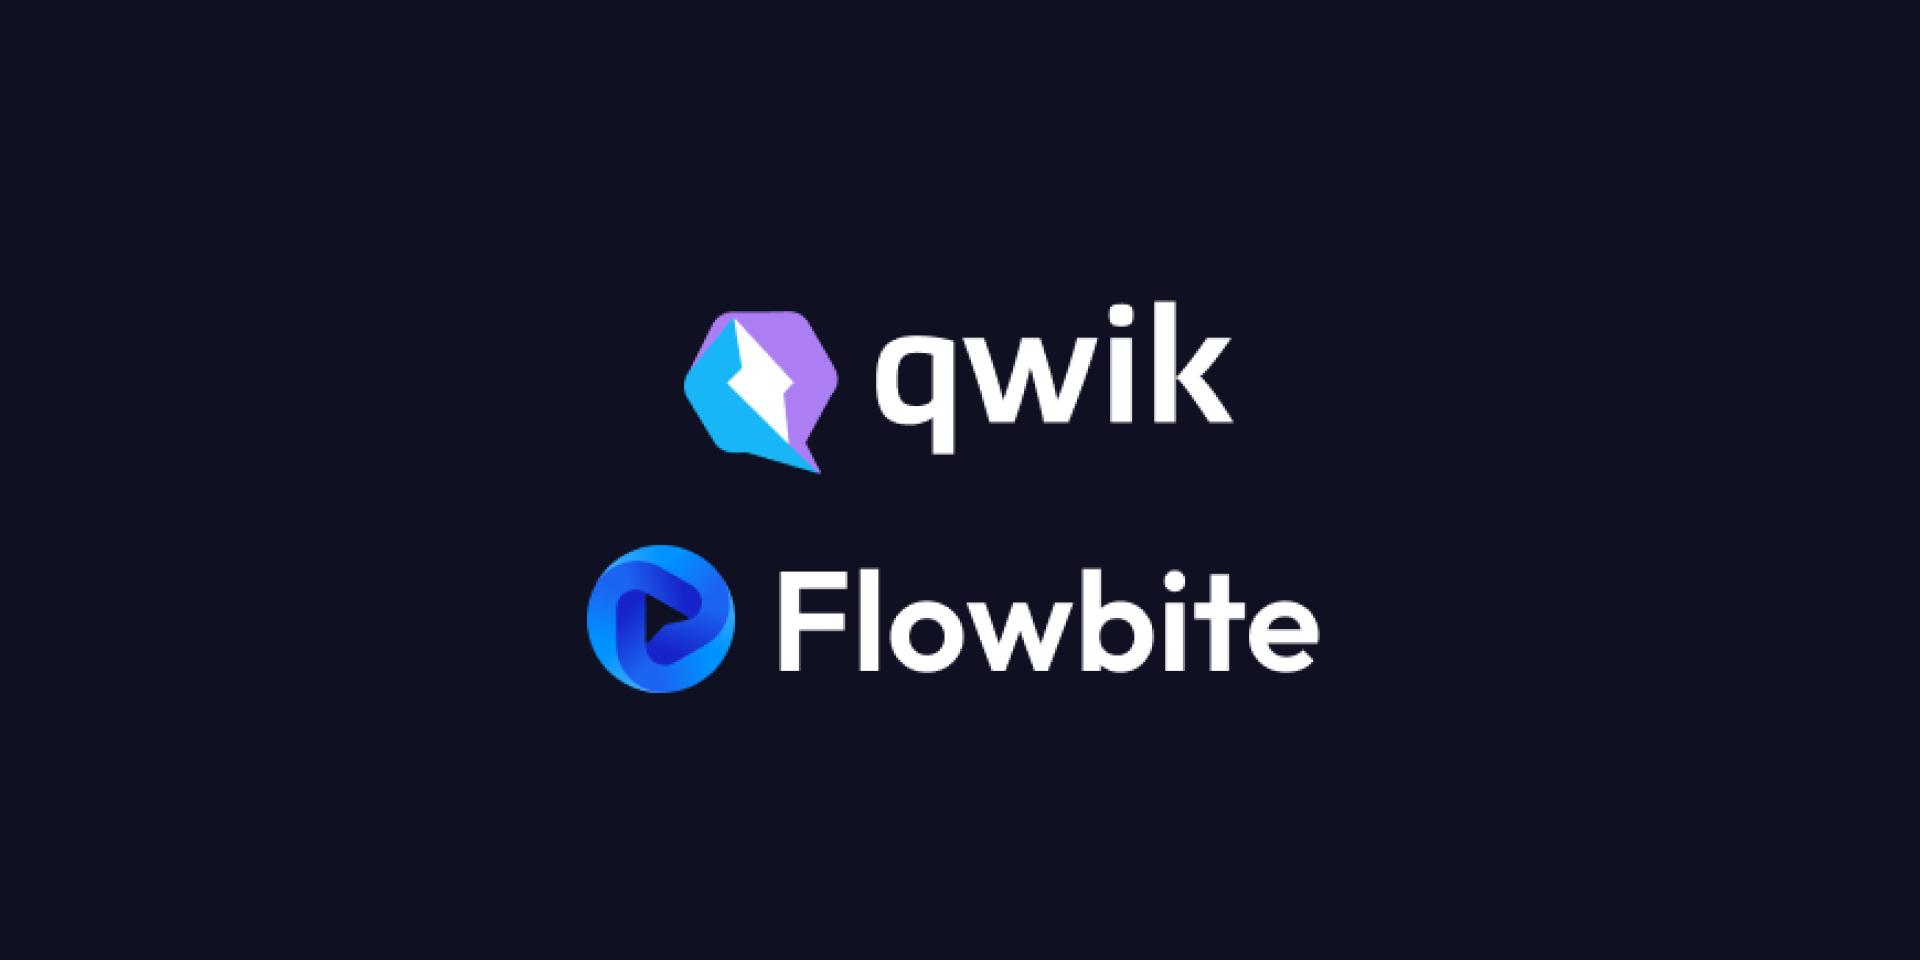 Learn how to install and use the Qwik, Tailwind CSS, and Flowbite stack